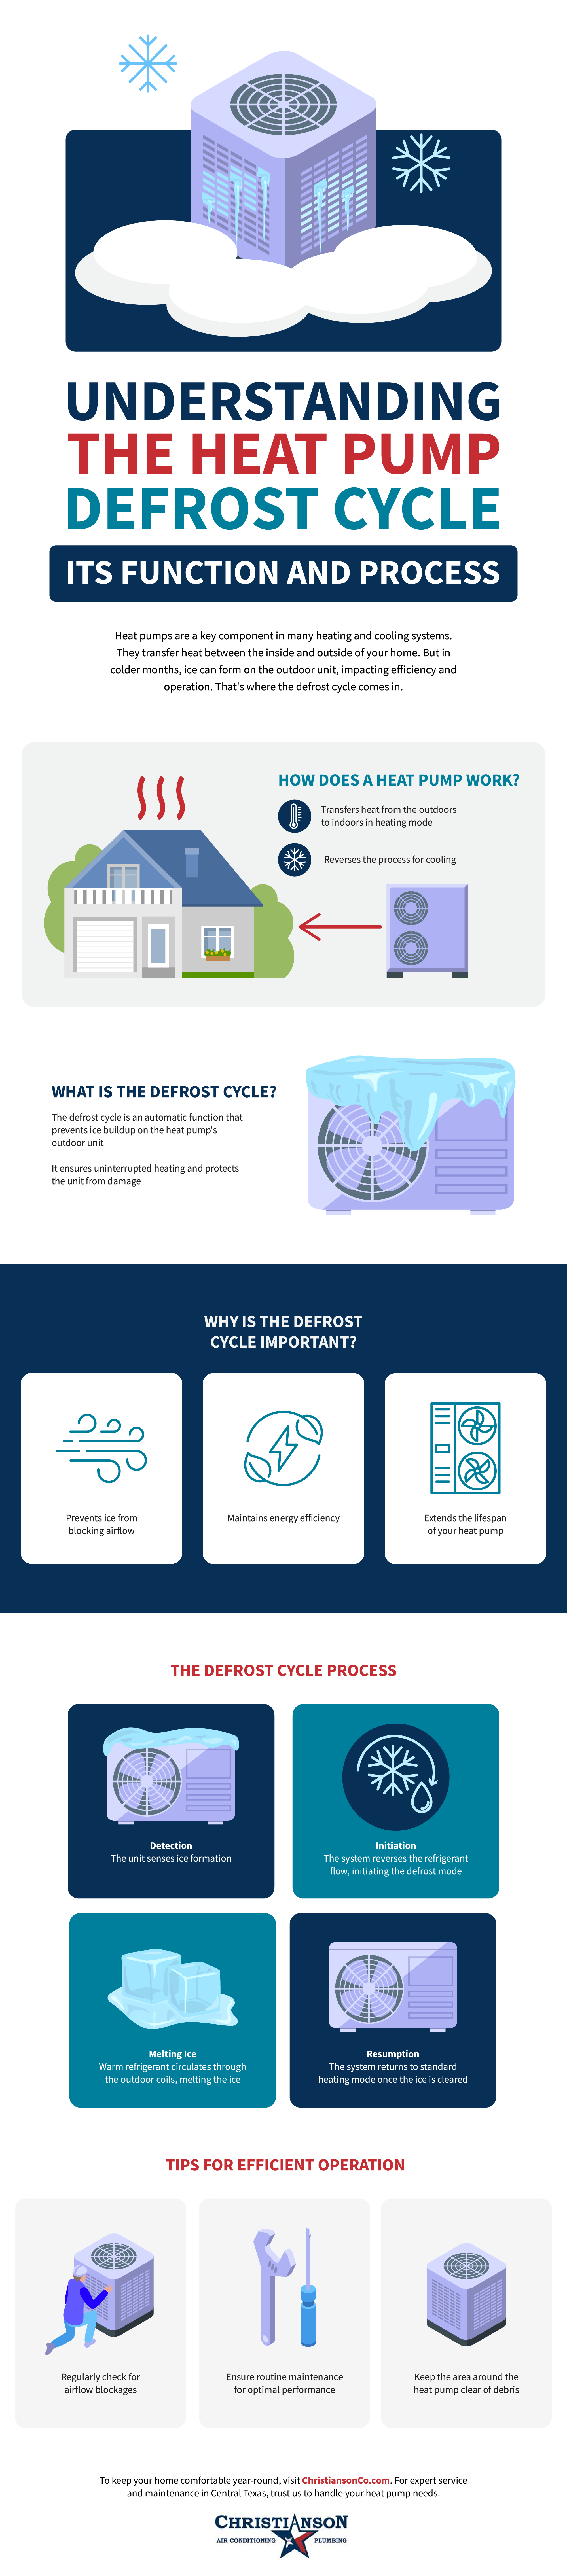 Heat Pump Defrost Cycle Infographic